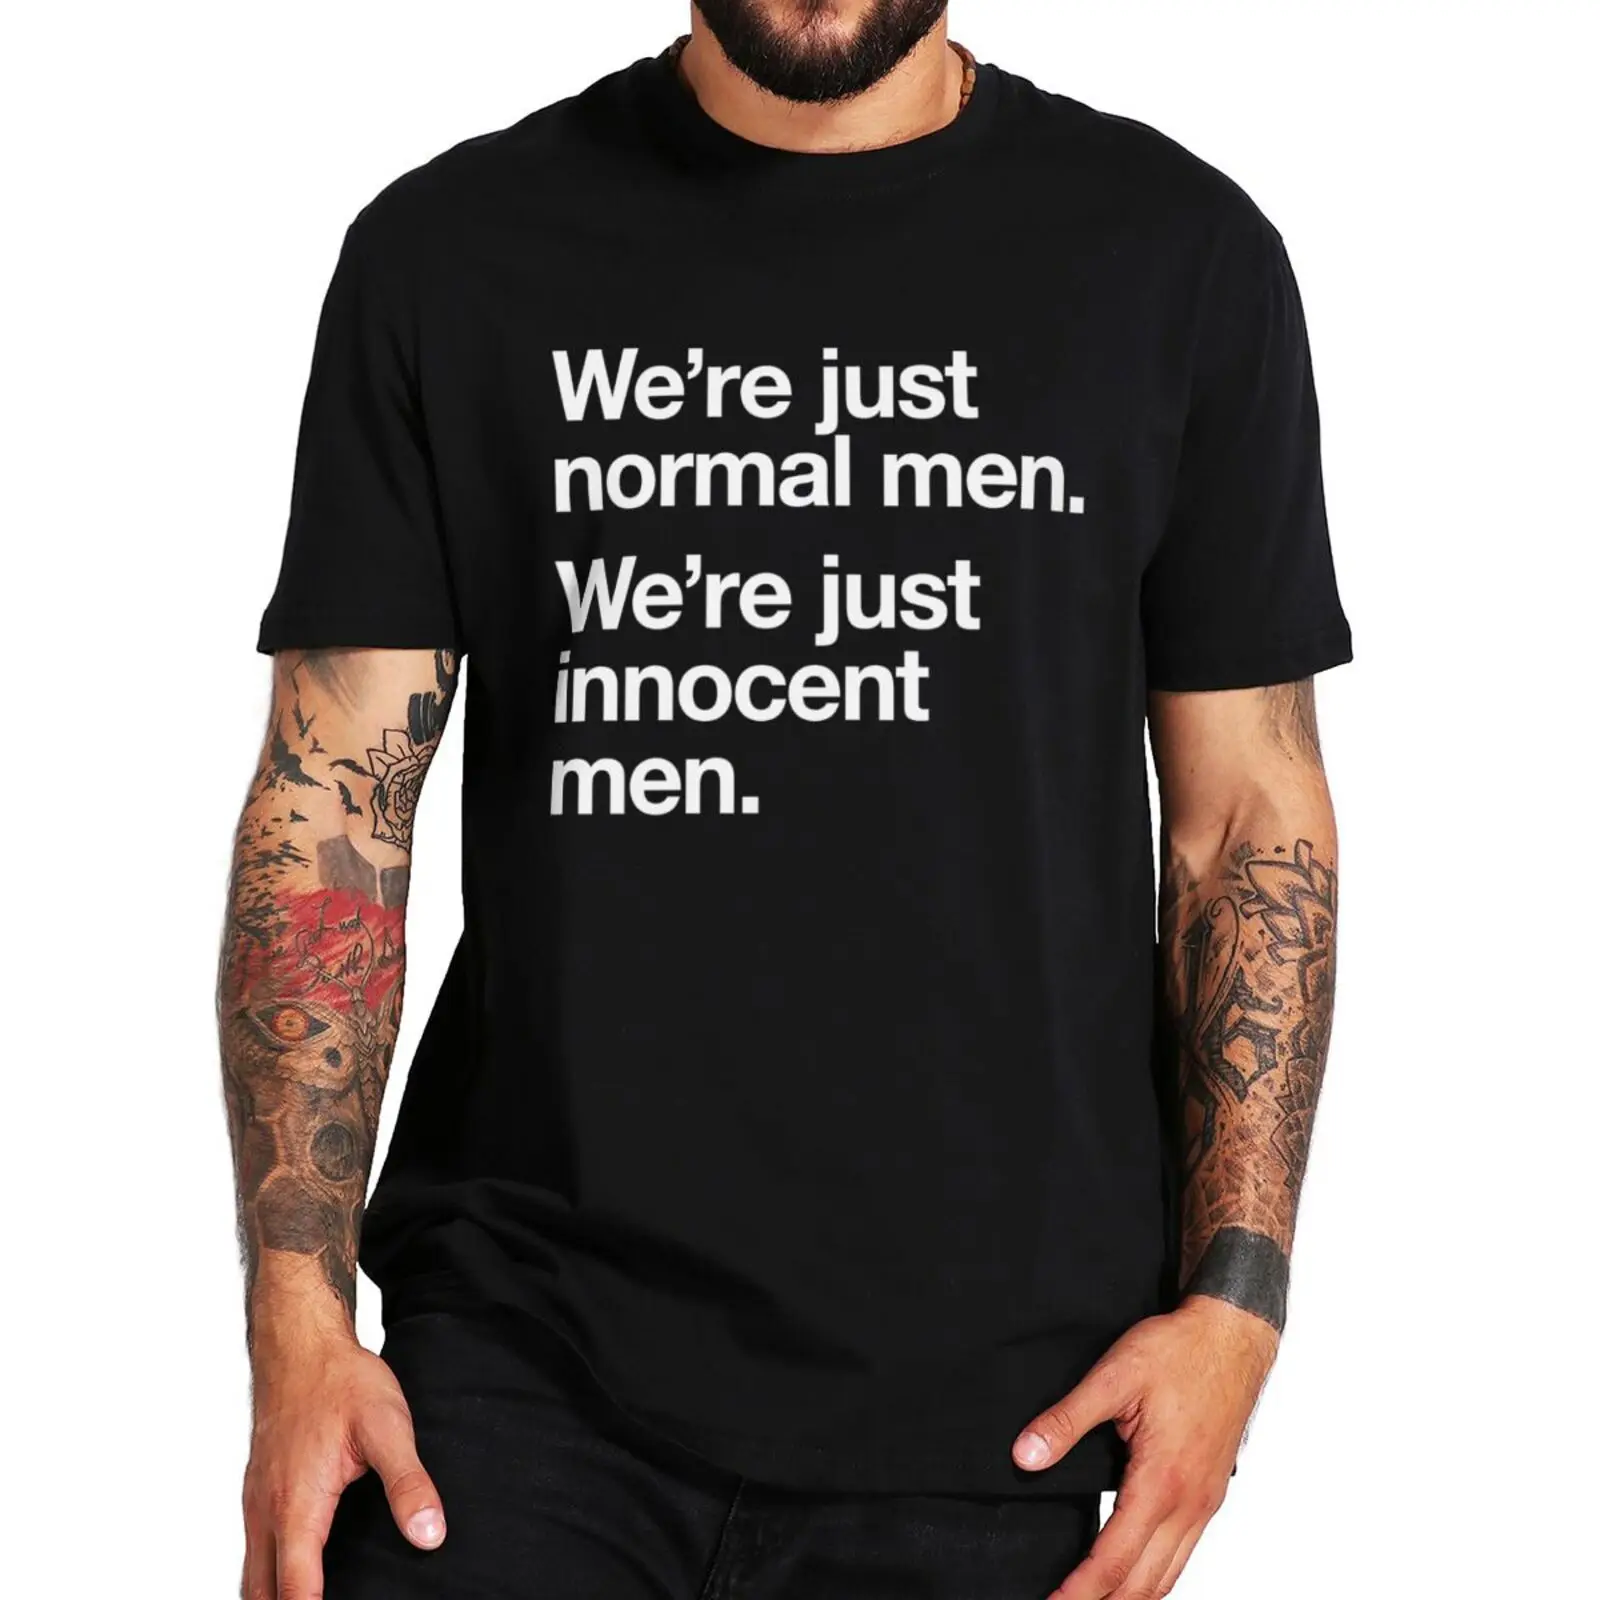 

We're Just Normal Men We're Just Innocent Men T-shirt Funny Quotes Tshirts 100% Cotton Unisex Oversized Casual Tops EU Size